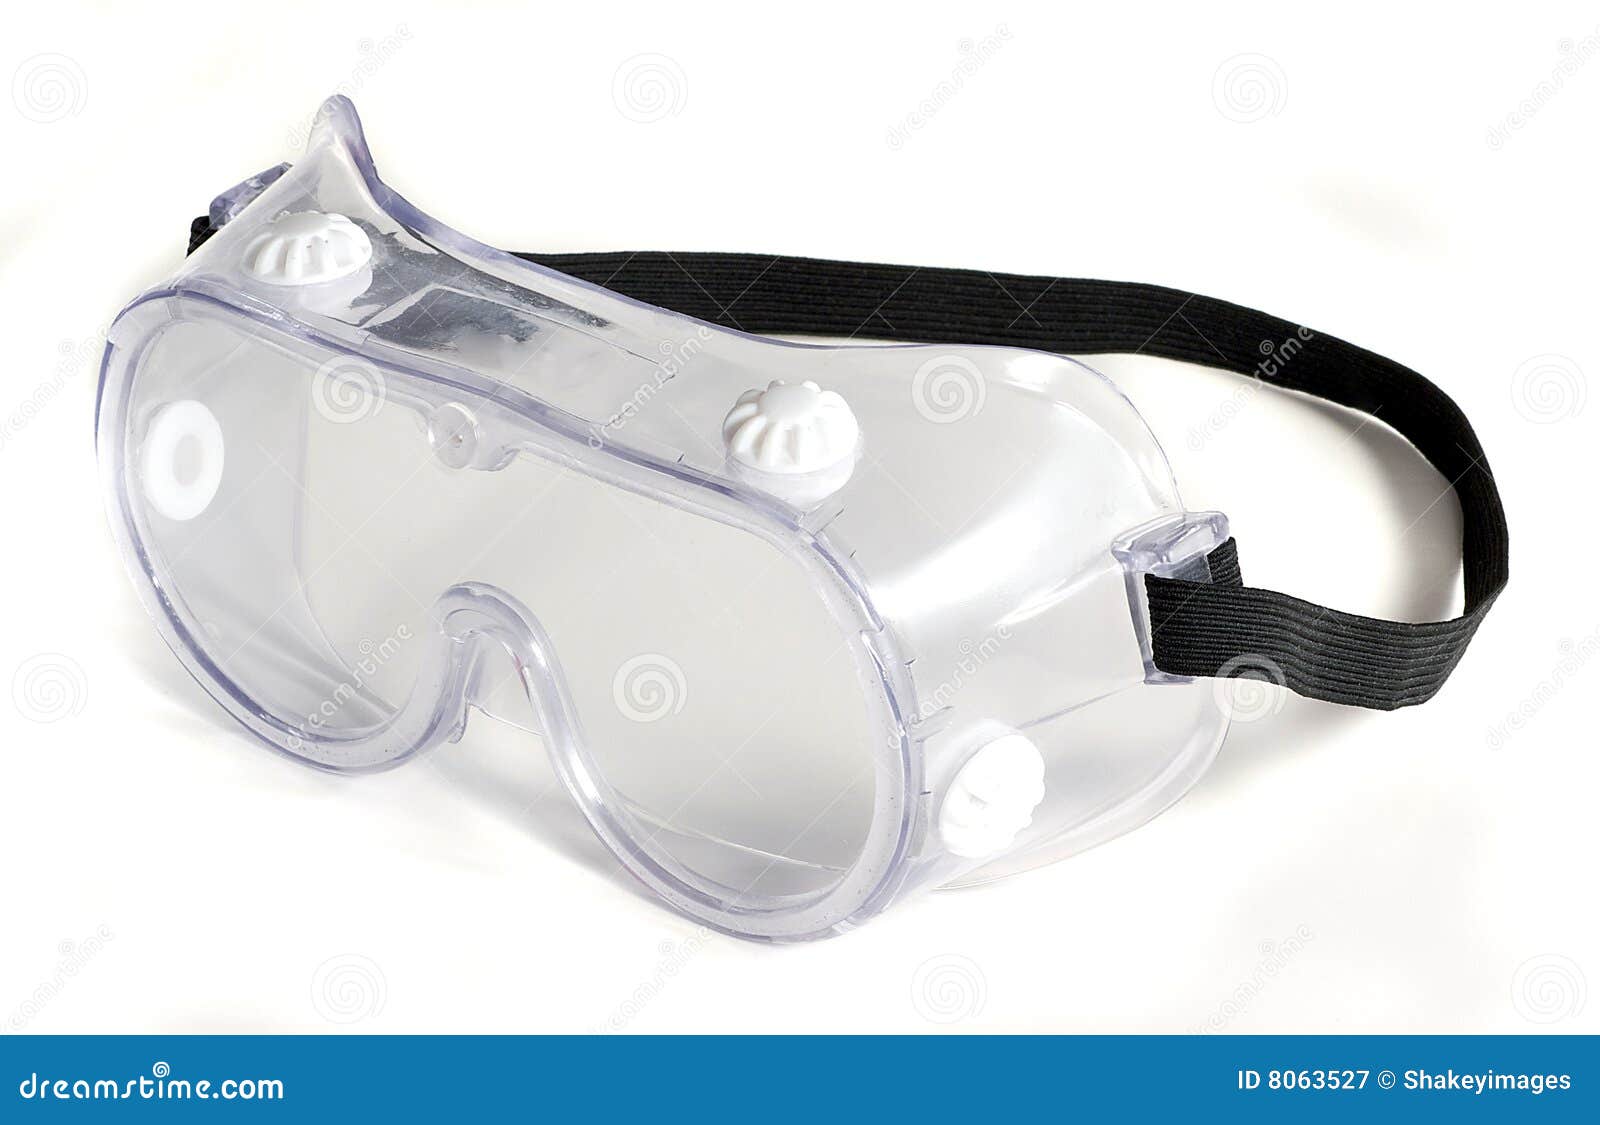  safety goggles